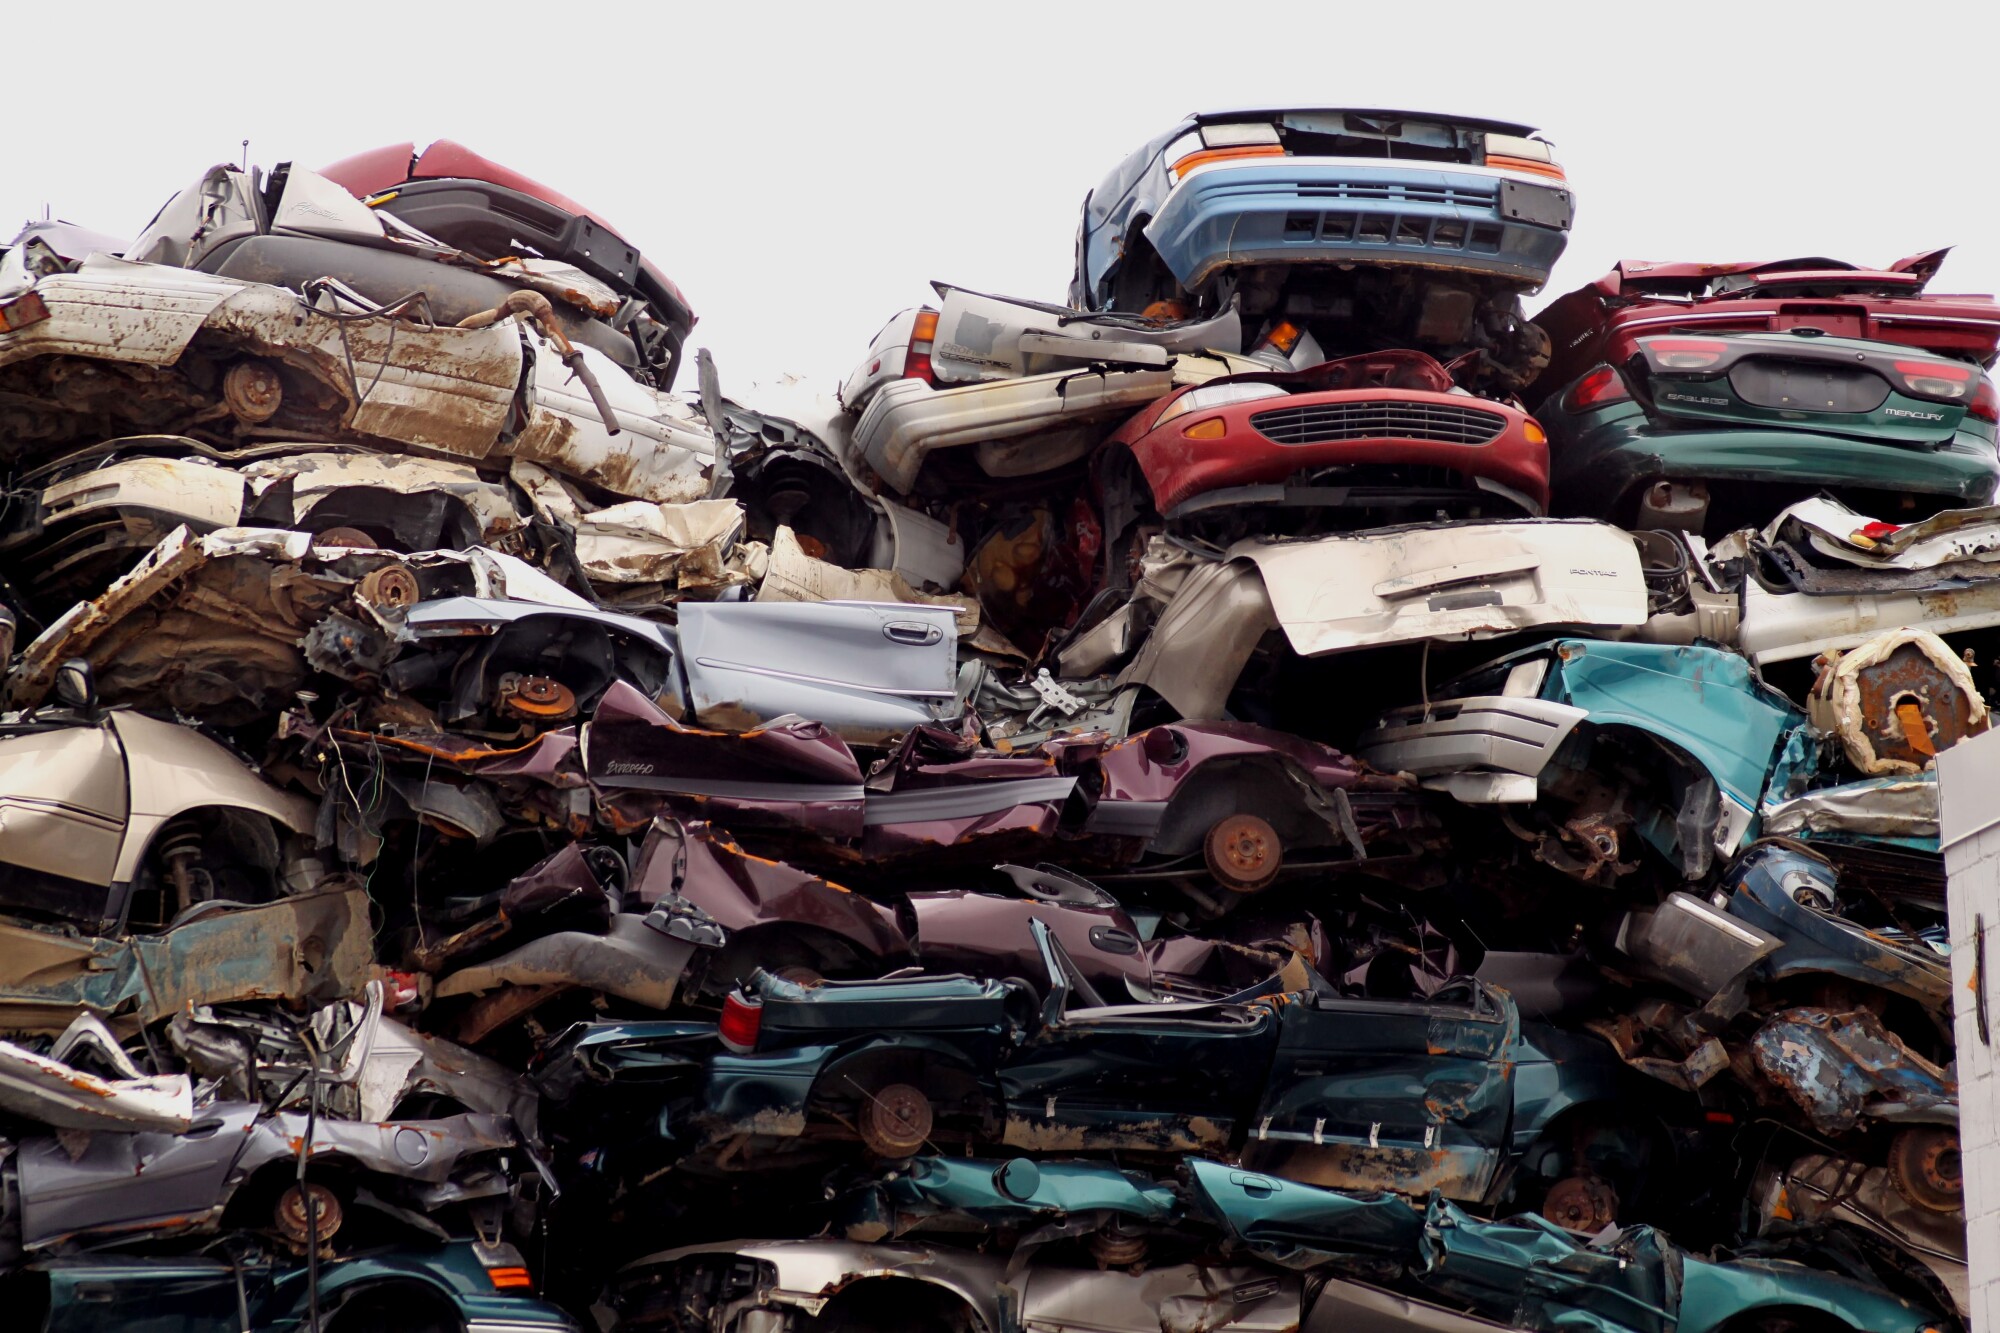 Scrapping Your Car